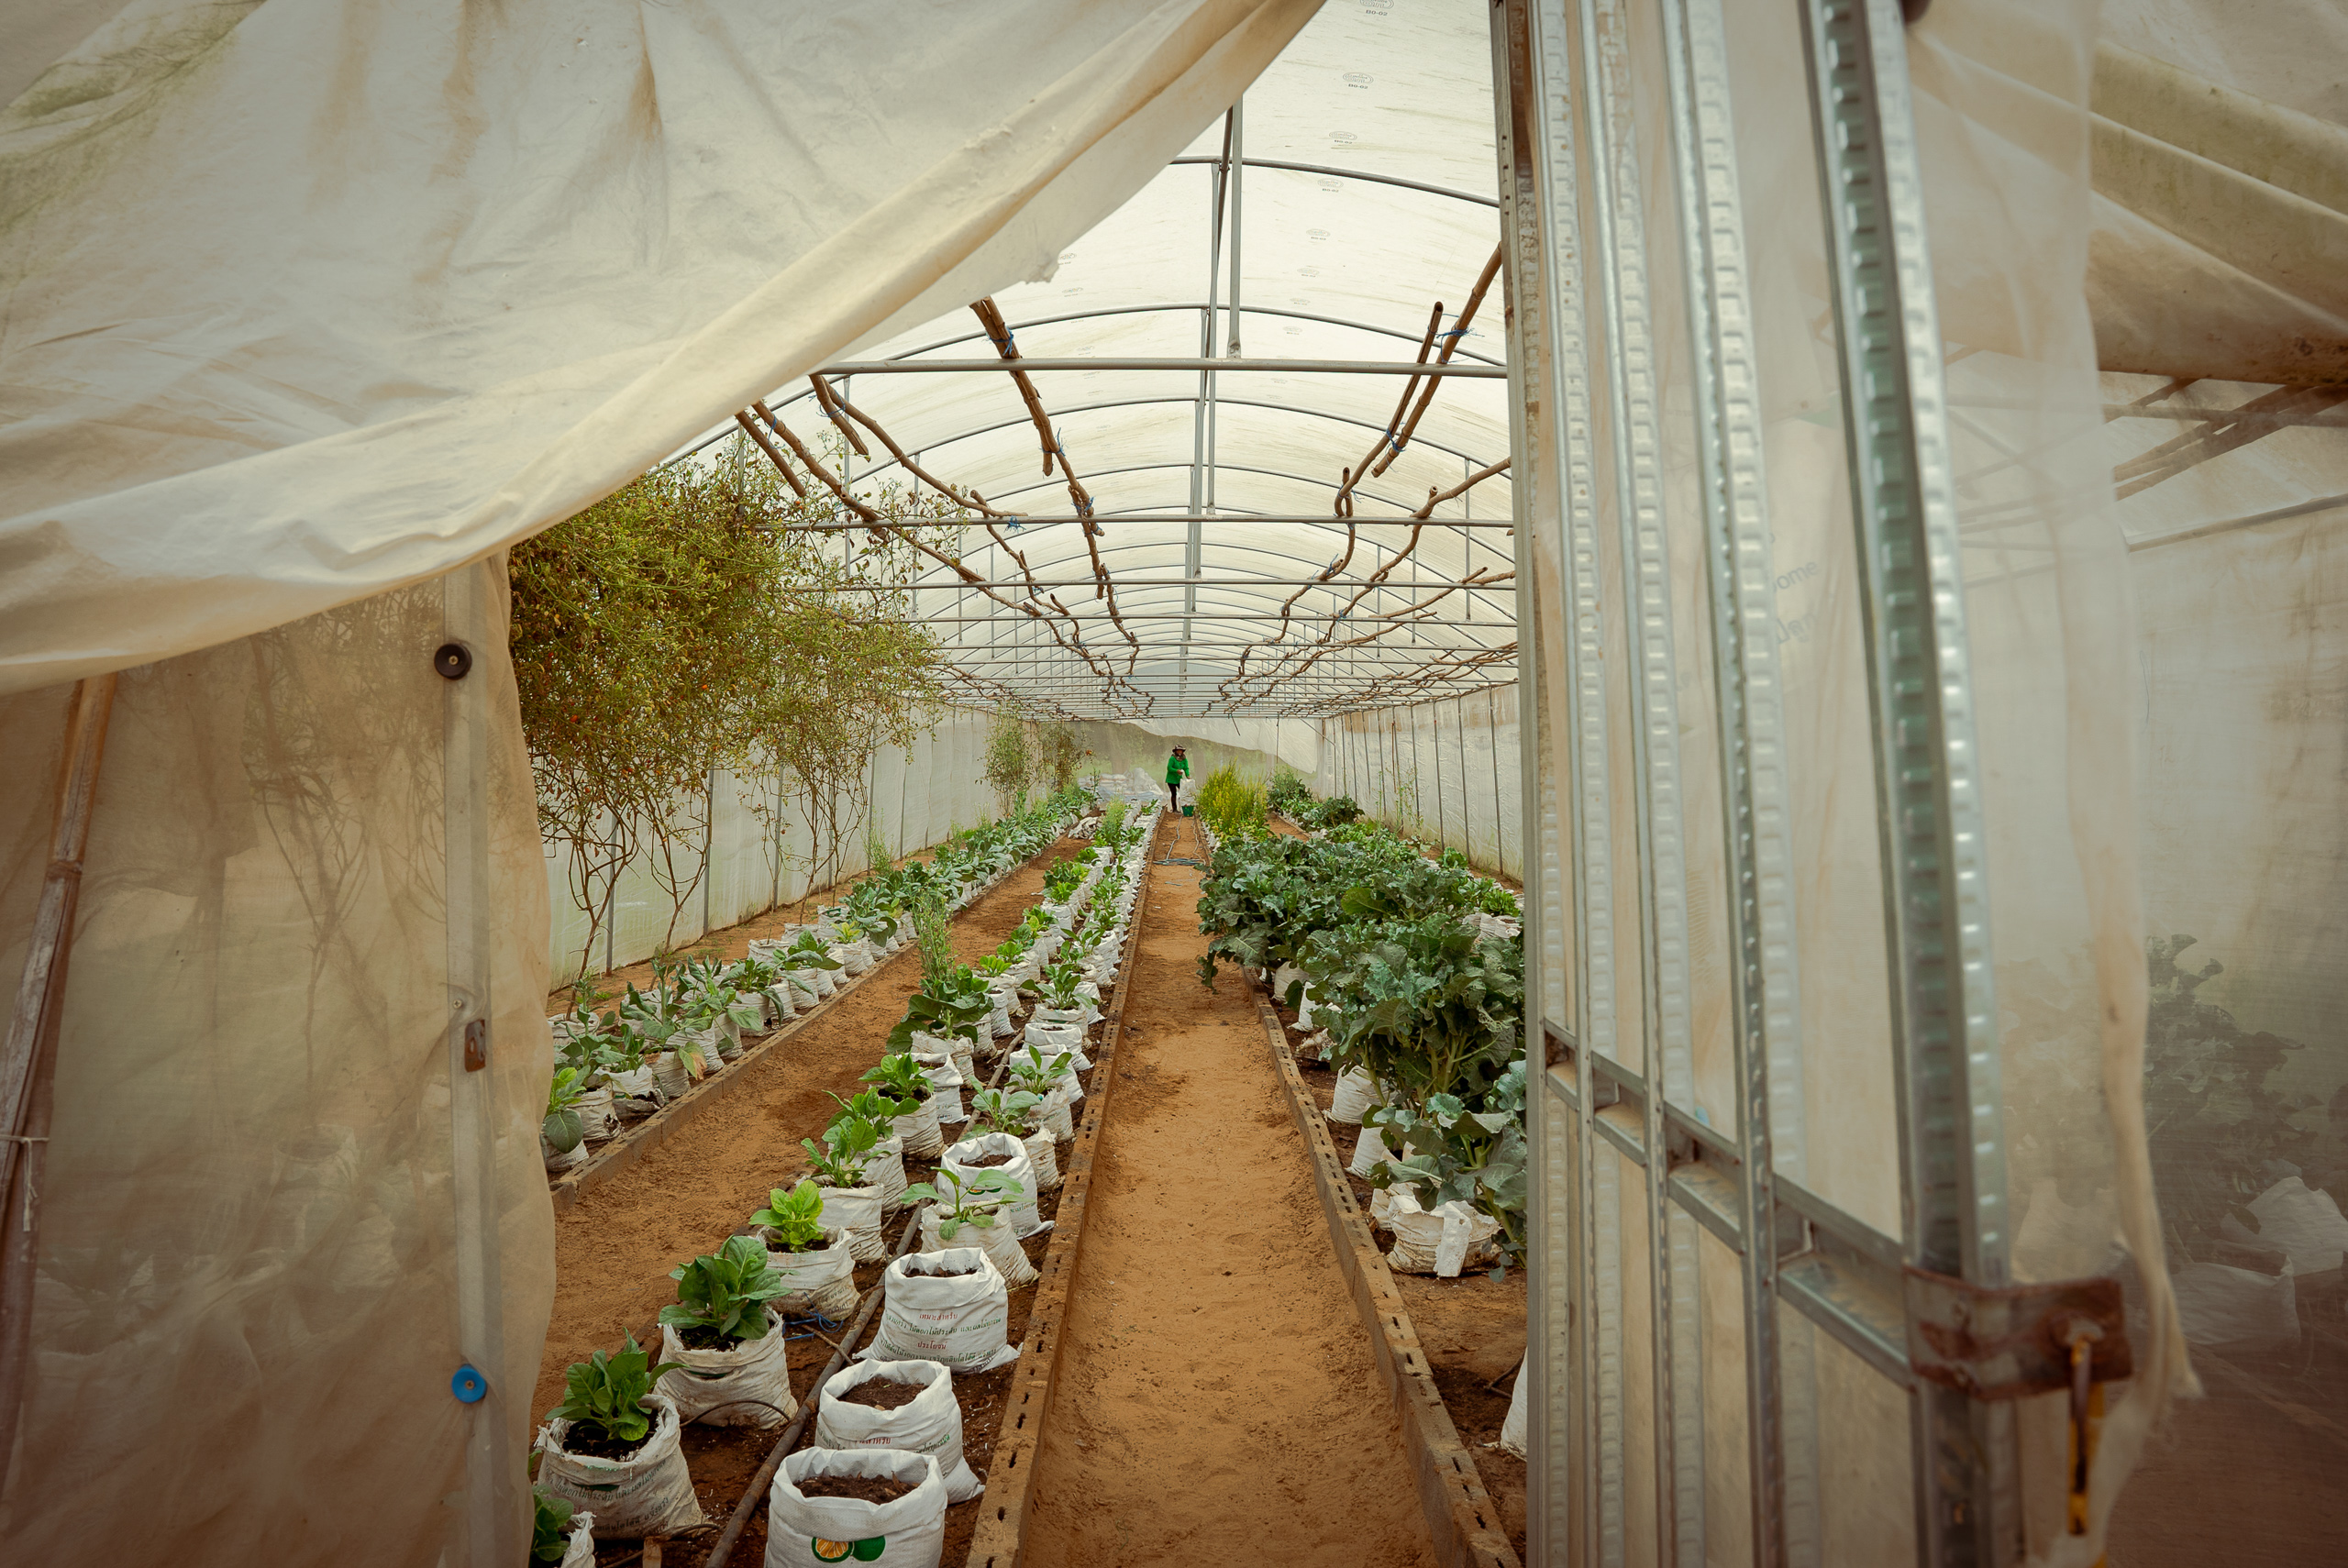 rows of seedlings planted in sacks under a closed greenhouse